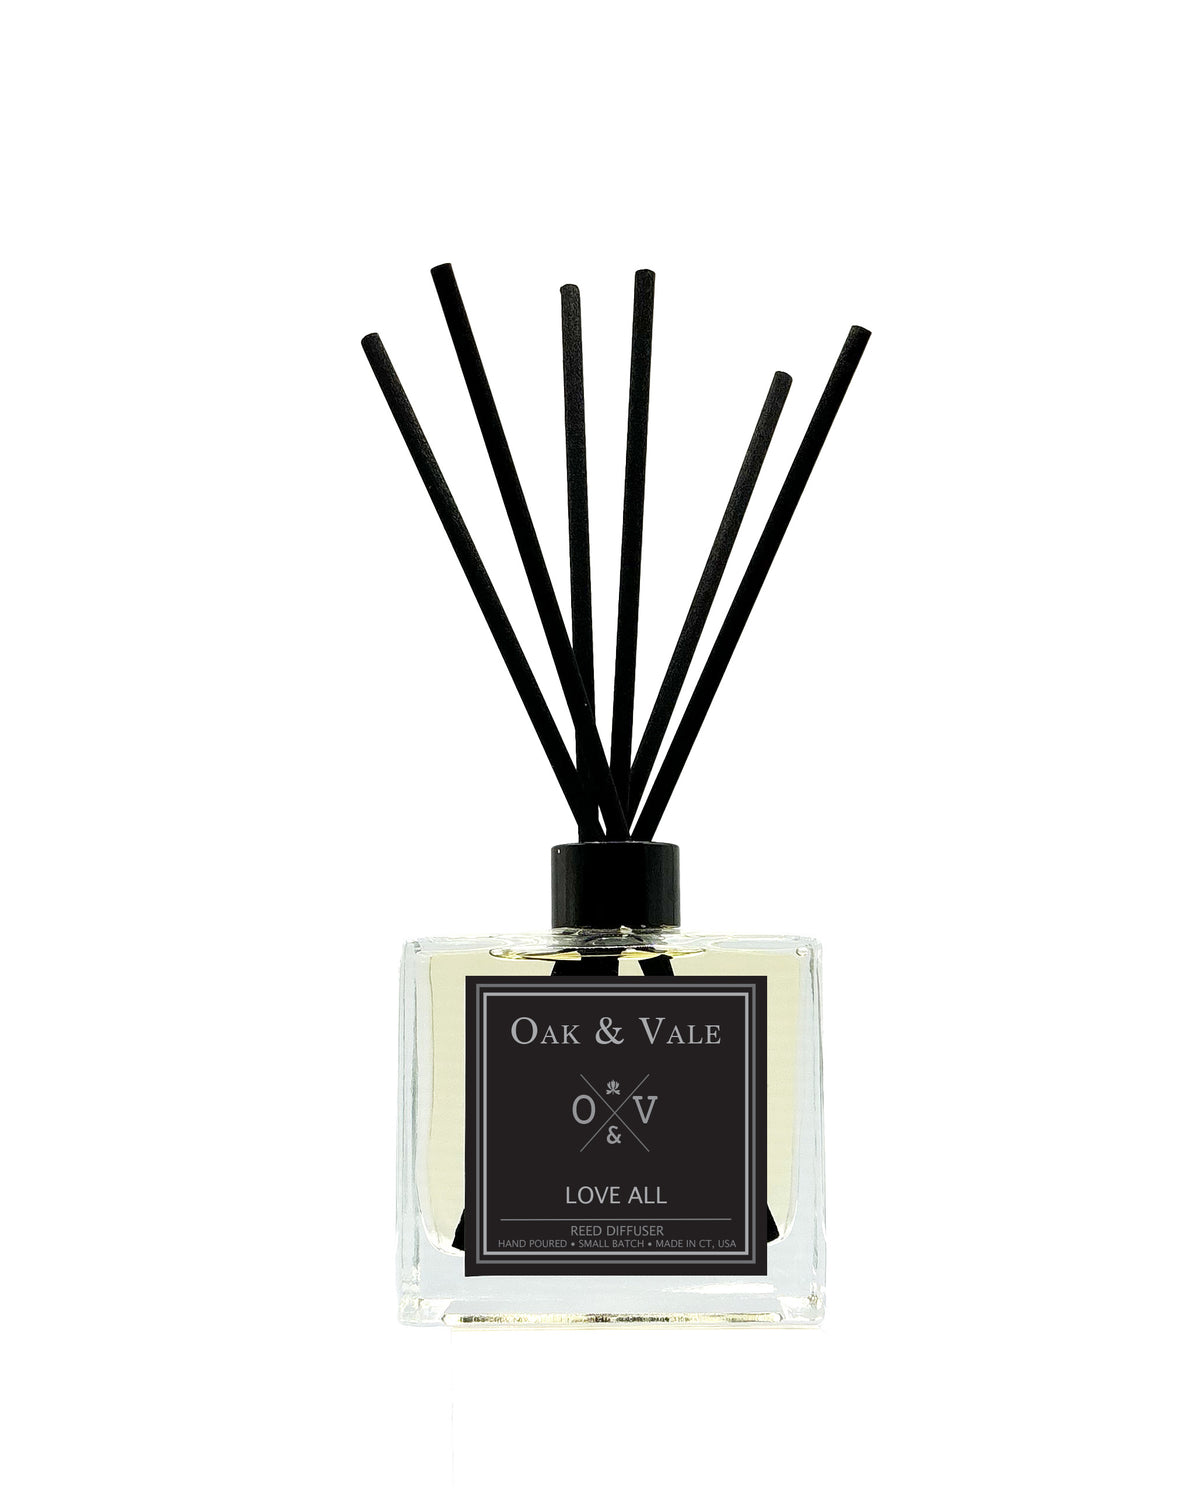 LOVE ALL REED DIFFUSER